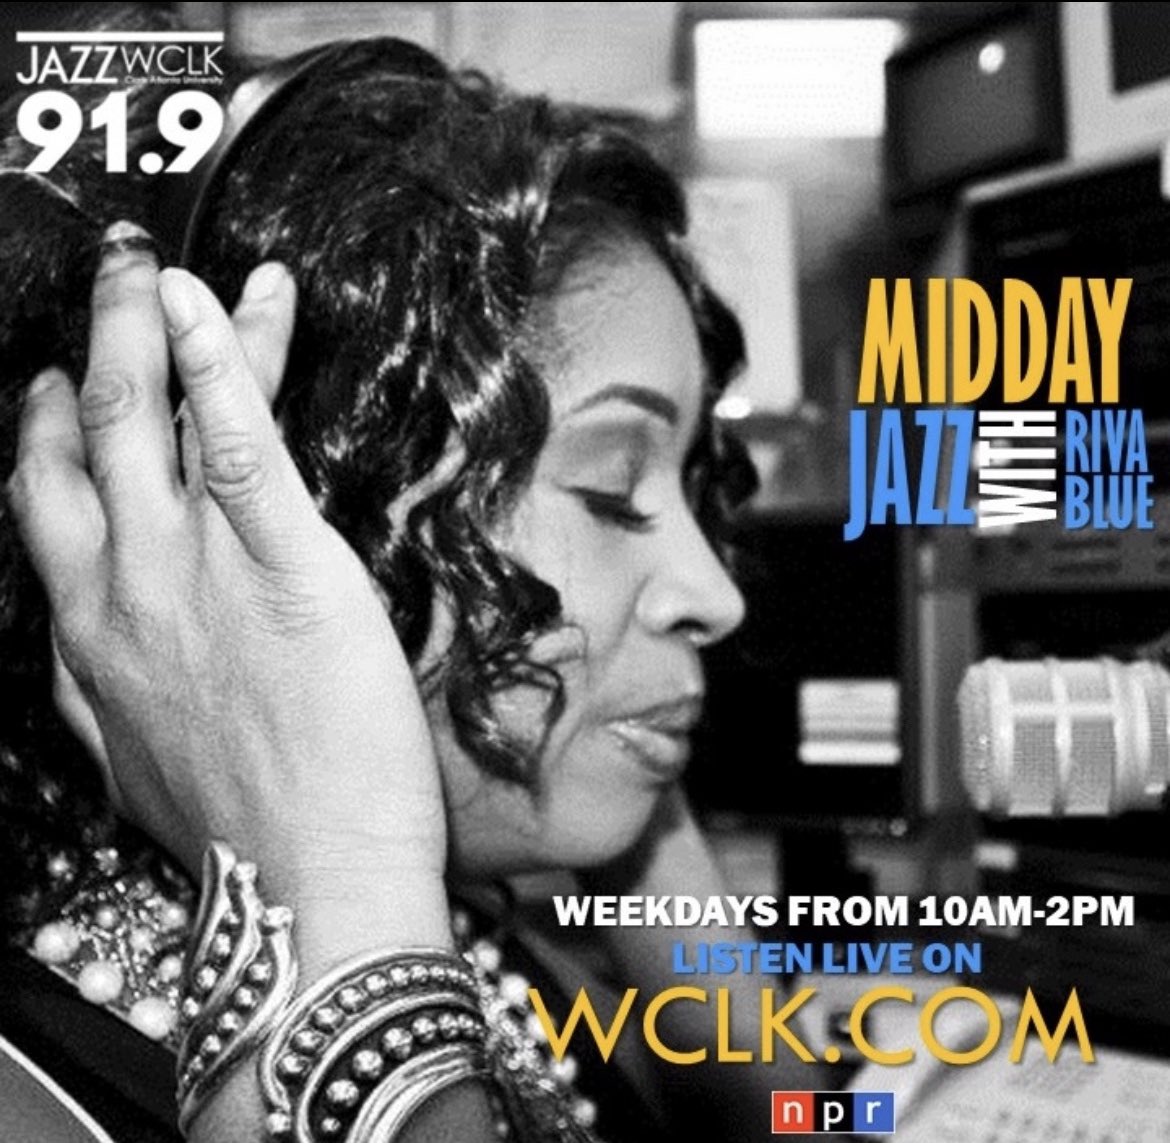 Tune-In from 10-2 for #MiddayJazz with @Rivablue ✨We are the #JazzoftheCity #WCLK919 #ATL #CAU